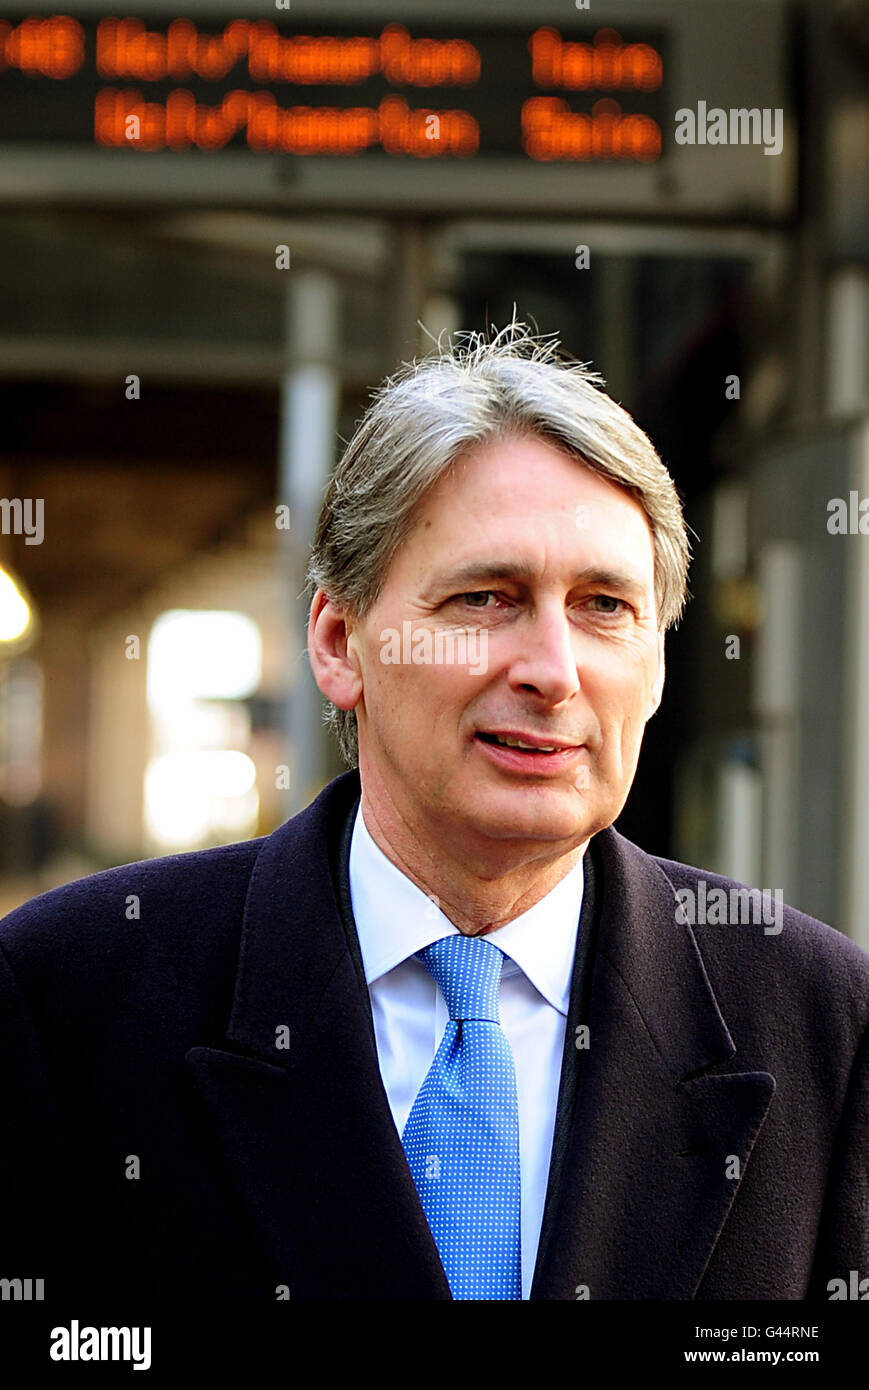 Secretary of State for Transport Philip Hammond is pictured at Snow Hill station in Birmingham. Campaign for Better Transport said today that the Government's plans for the HS2 high-speed rail project must not lead to less investment in the rest of the network. Its comments came ahead of a Government launch next week of consultation on HS2 which could cost around 33 billion if the section north of Birmingham goes ahead. Stock Photo